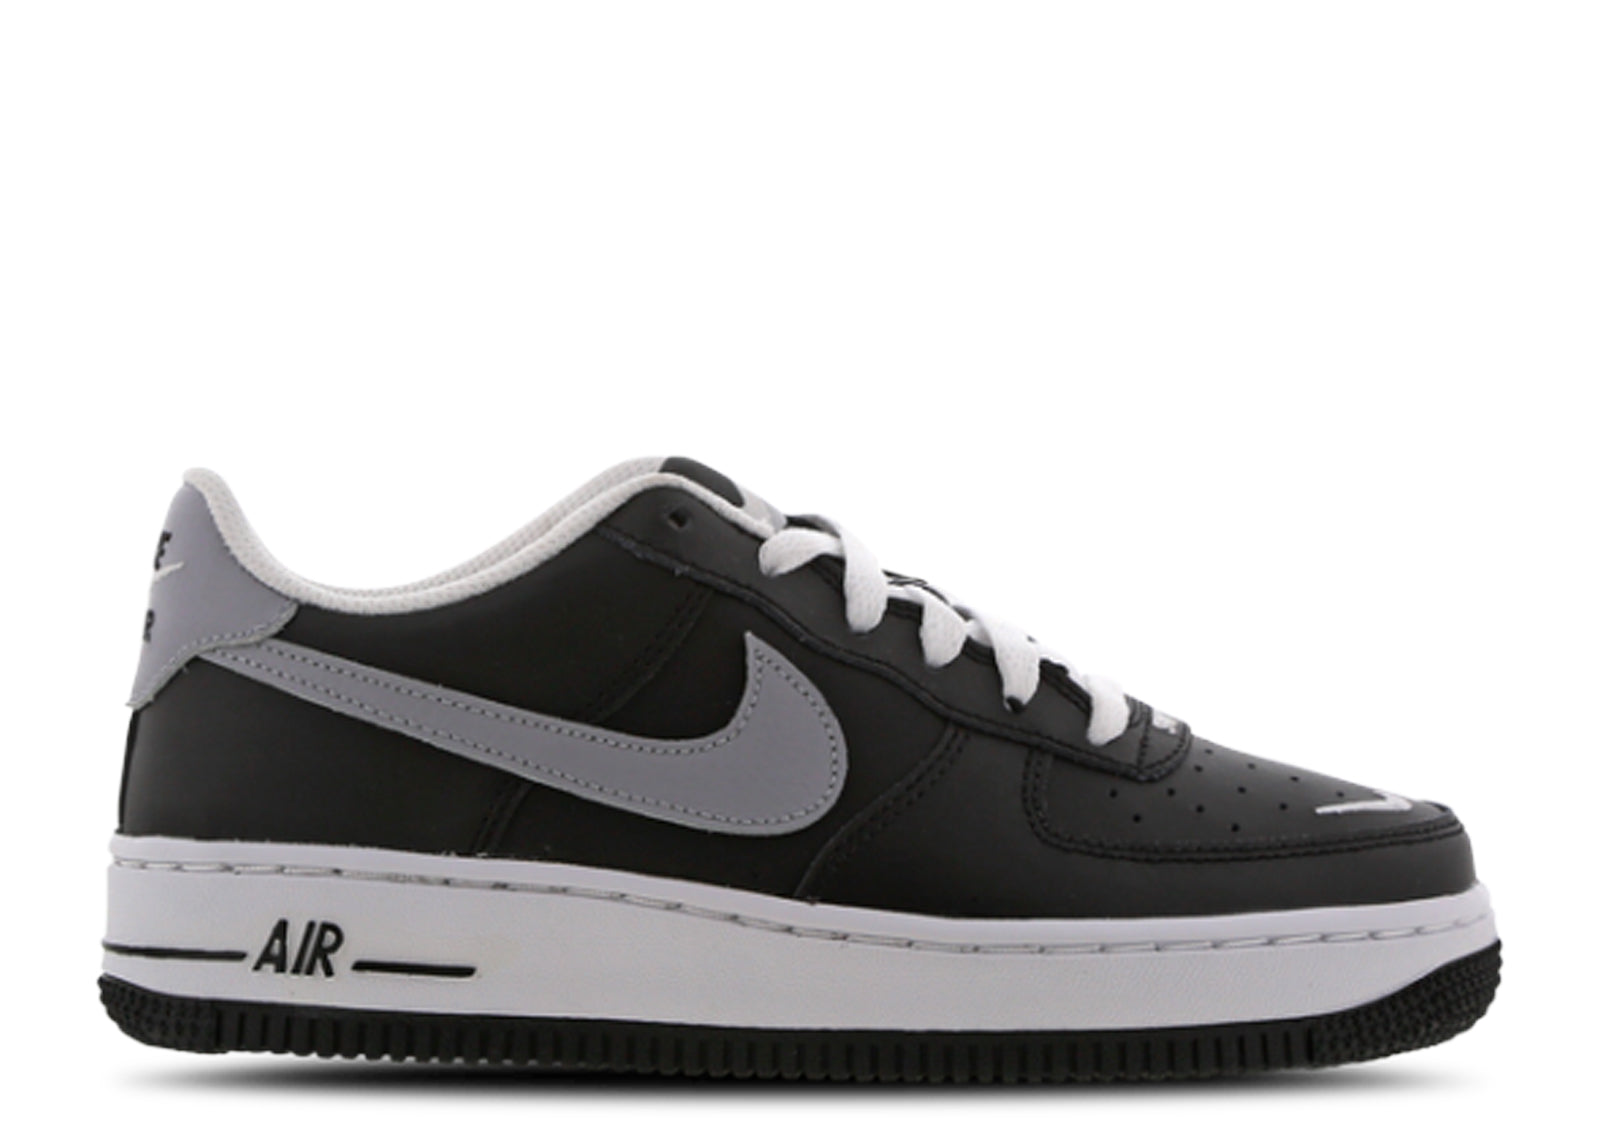 Second Chance - sail nike Air Force 1 Black Sport GS - 37,5 | NEW